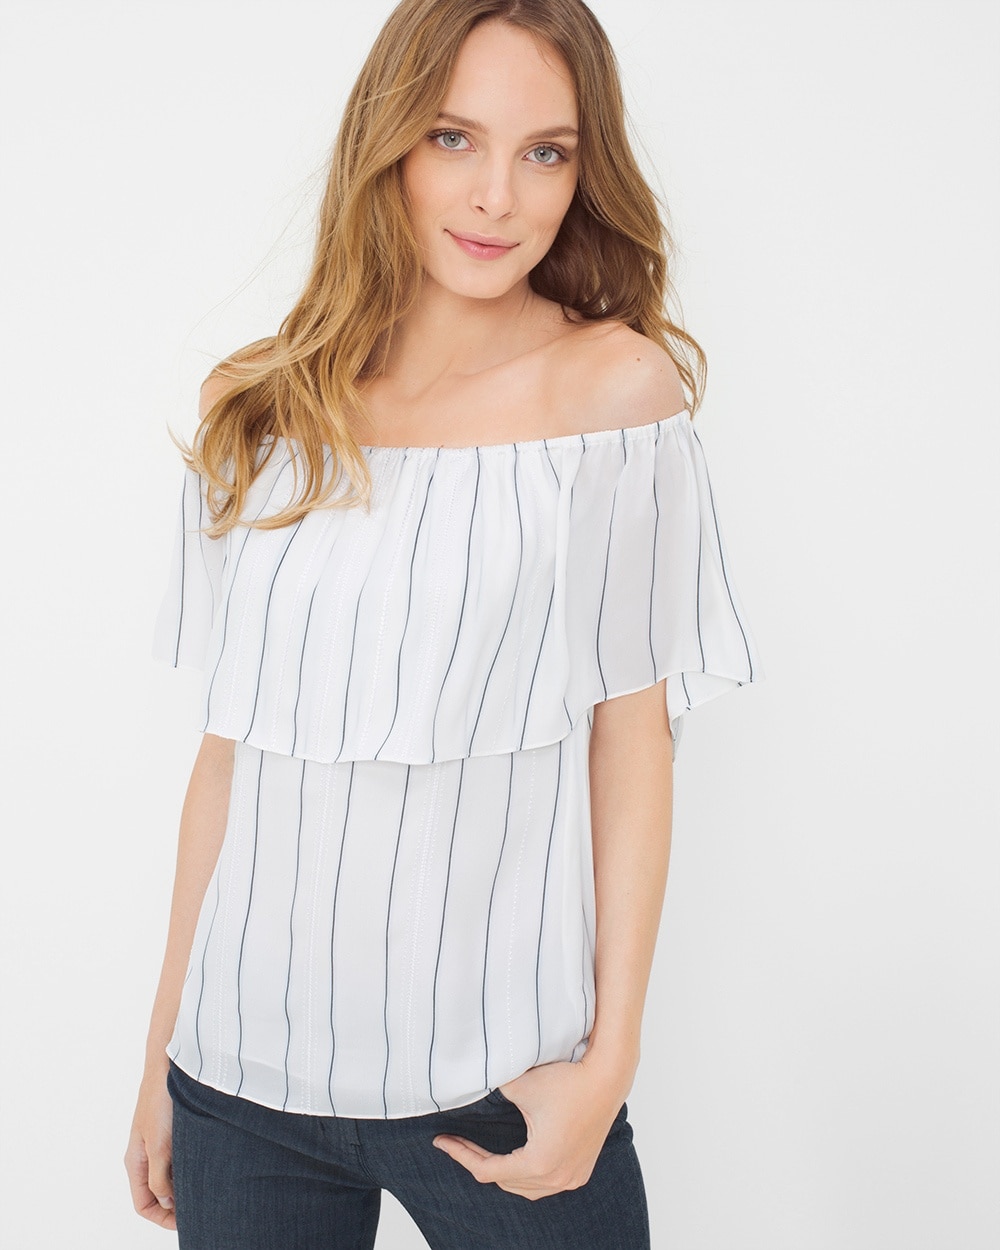 Off-The-Shoulder Stripe Blouse video preview image, click to start video